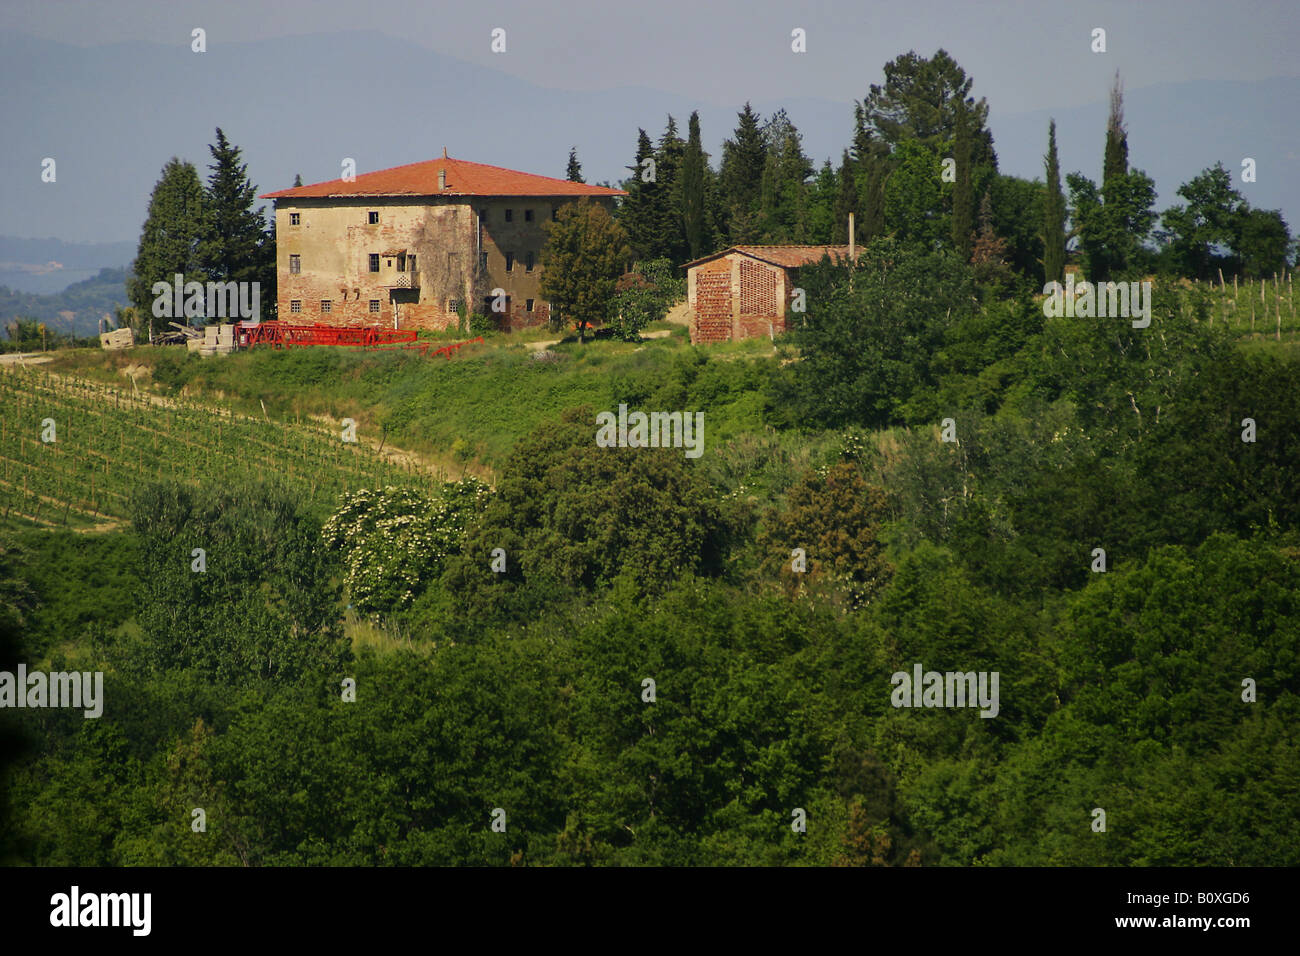 Tuscan landscape with traditional stone building in the distance Stock Photo